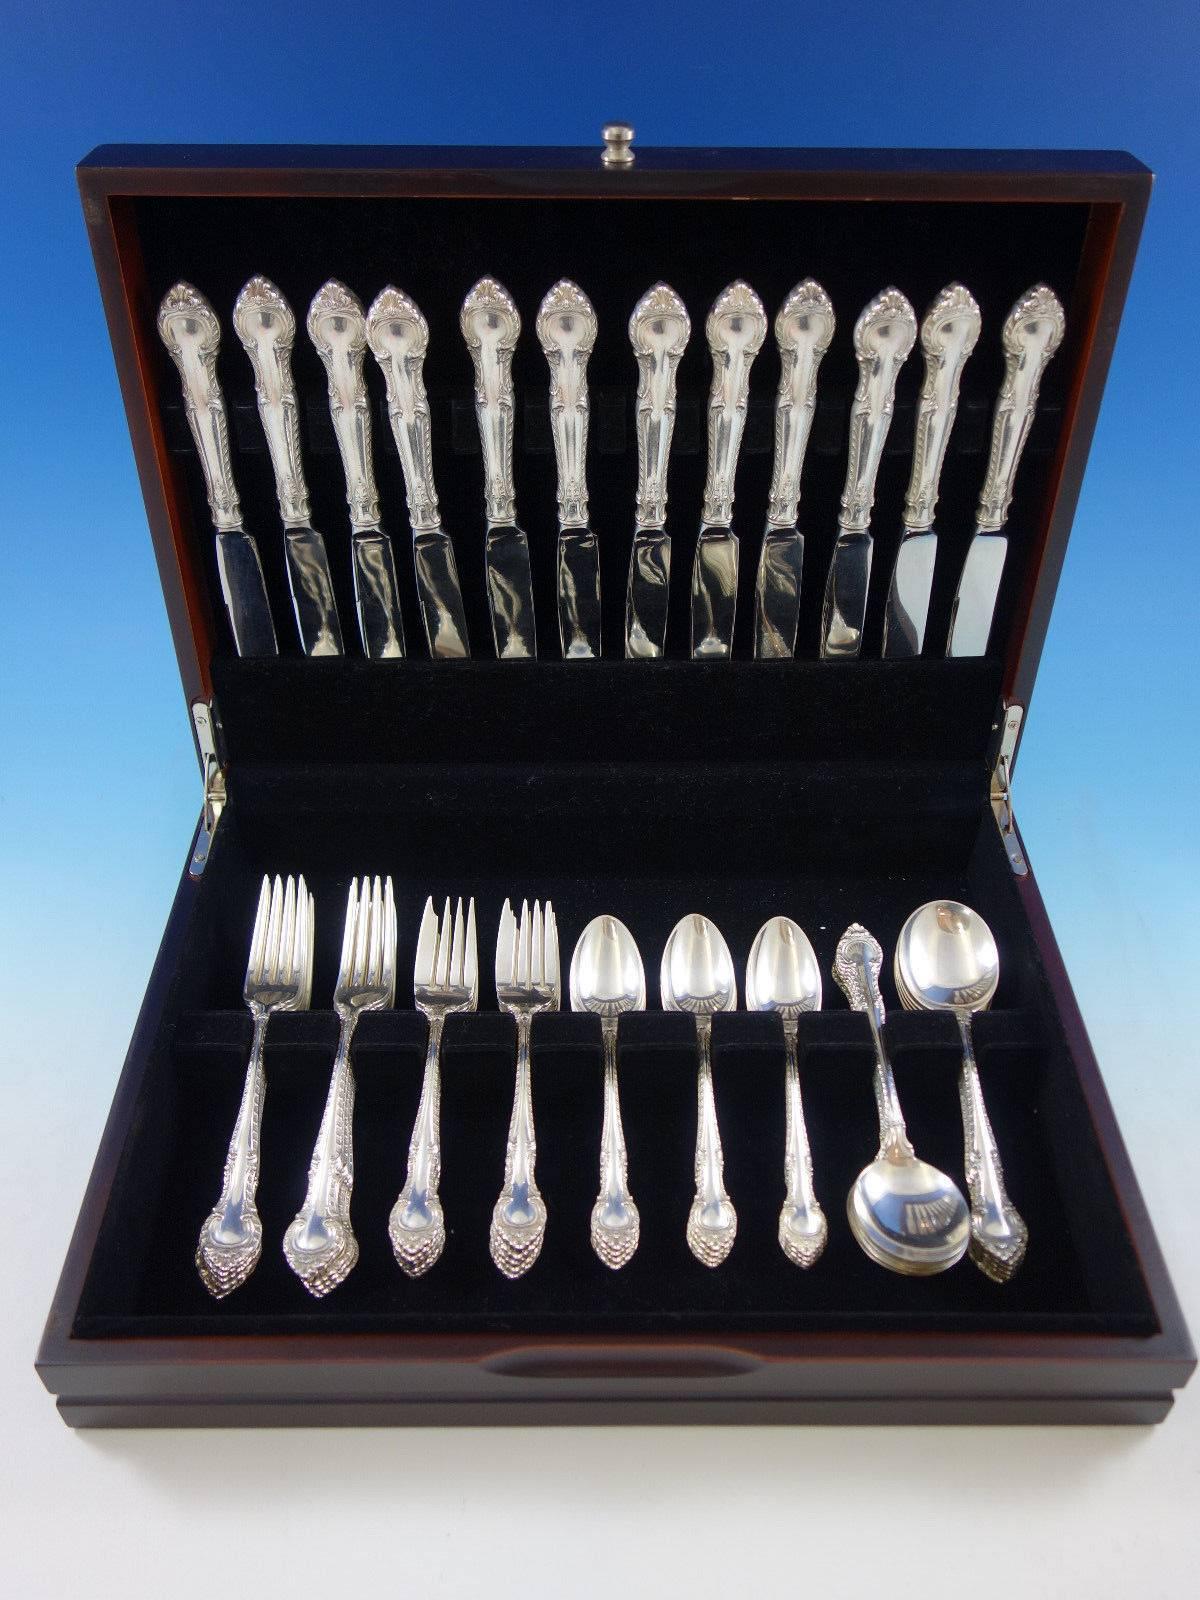 English Gadroon by Gorham sterling silver flatware set of 60 pieces. This set includes: 

12 knives, 8 7/8